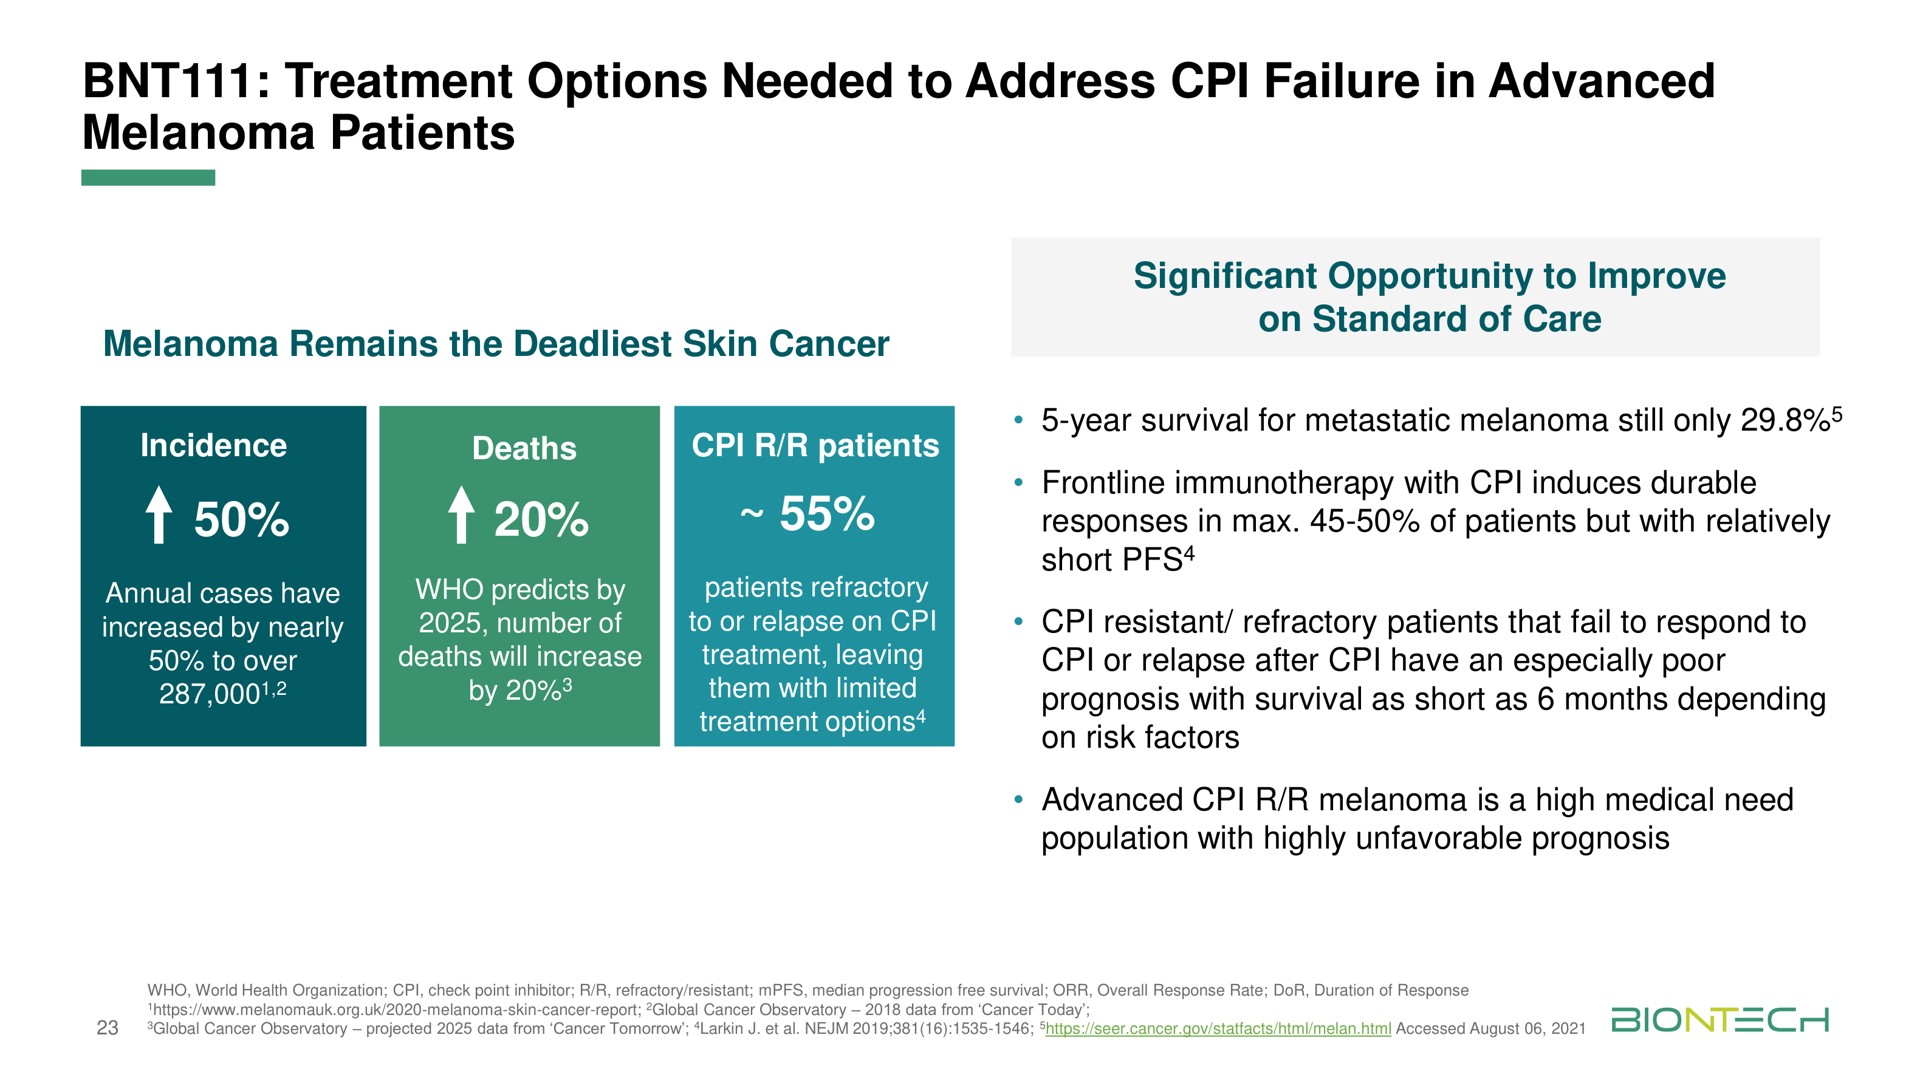 treatment options needed to address failure in advanced melanoma patients oar ley | BioNTech